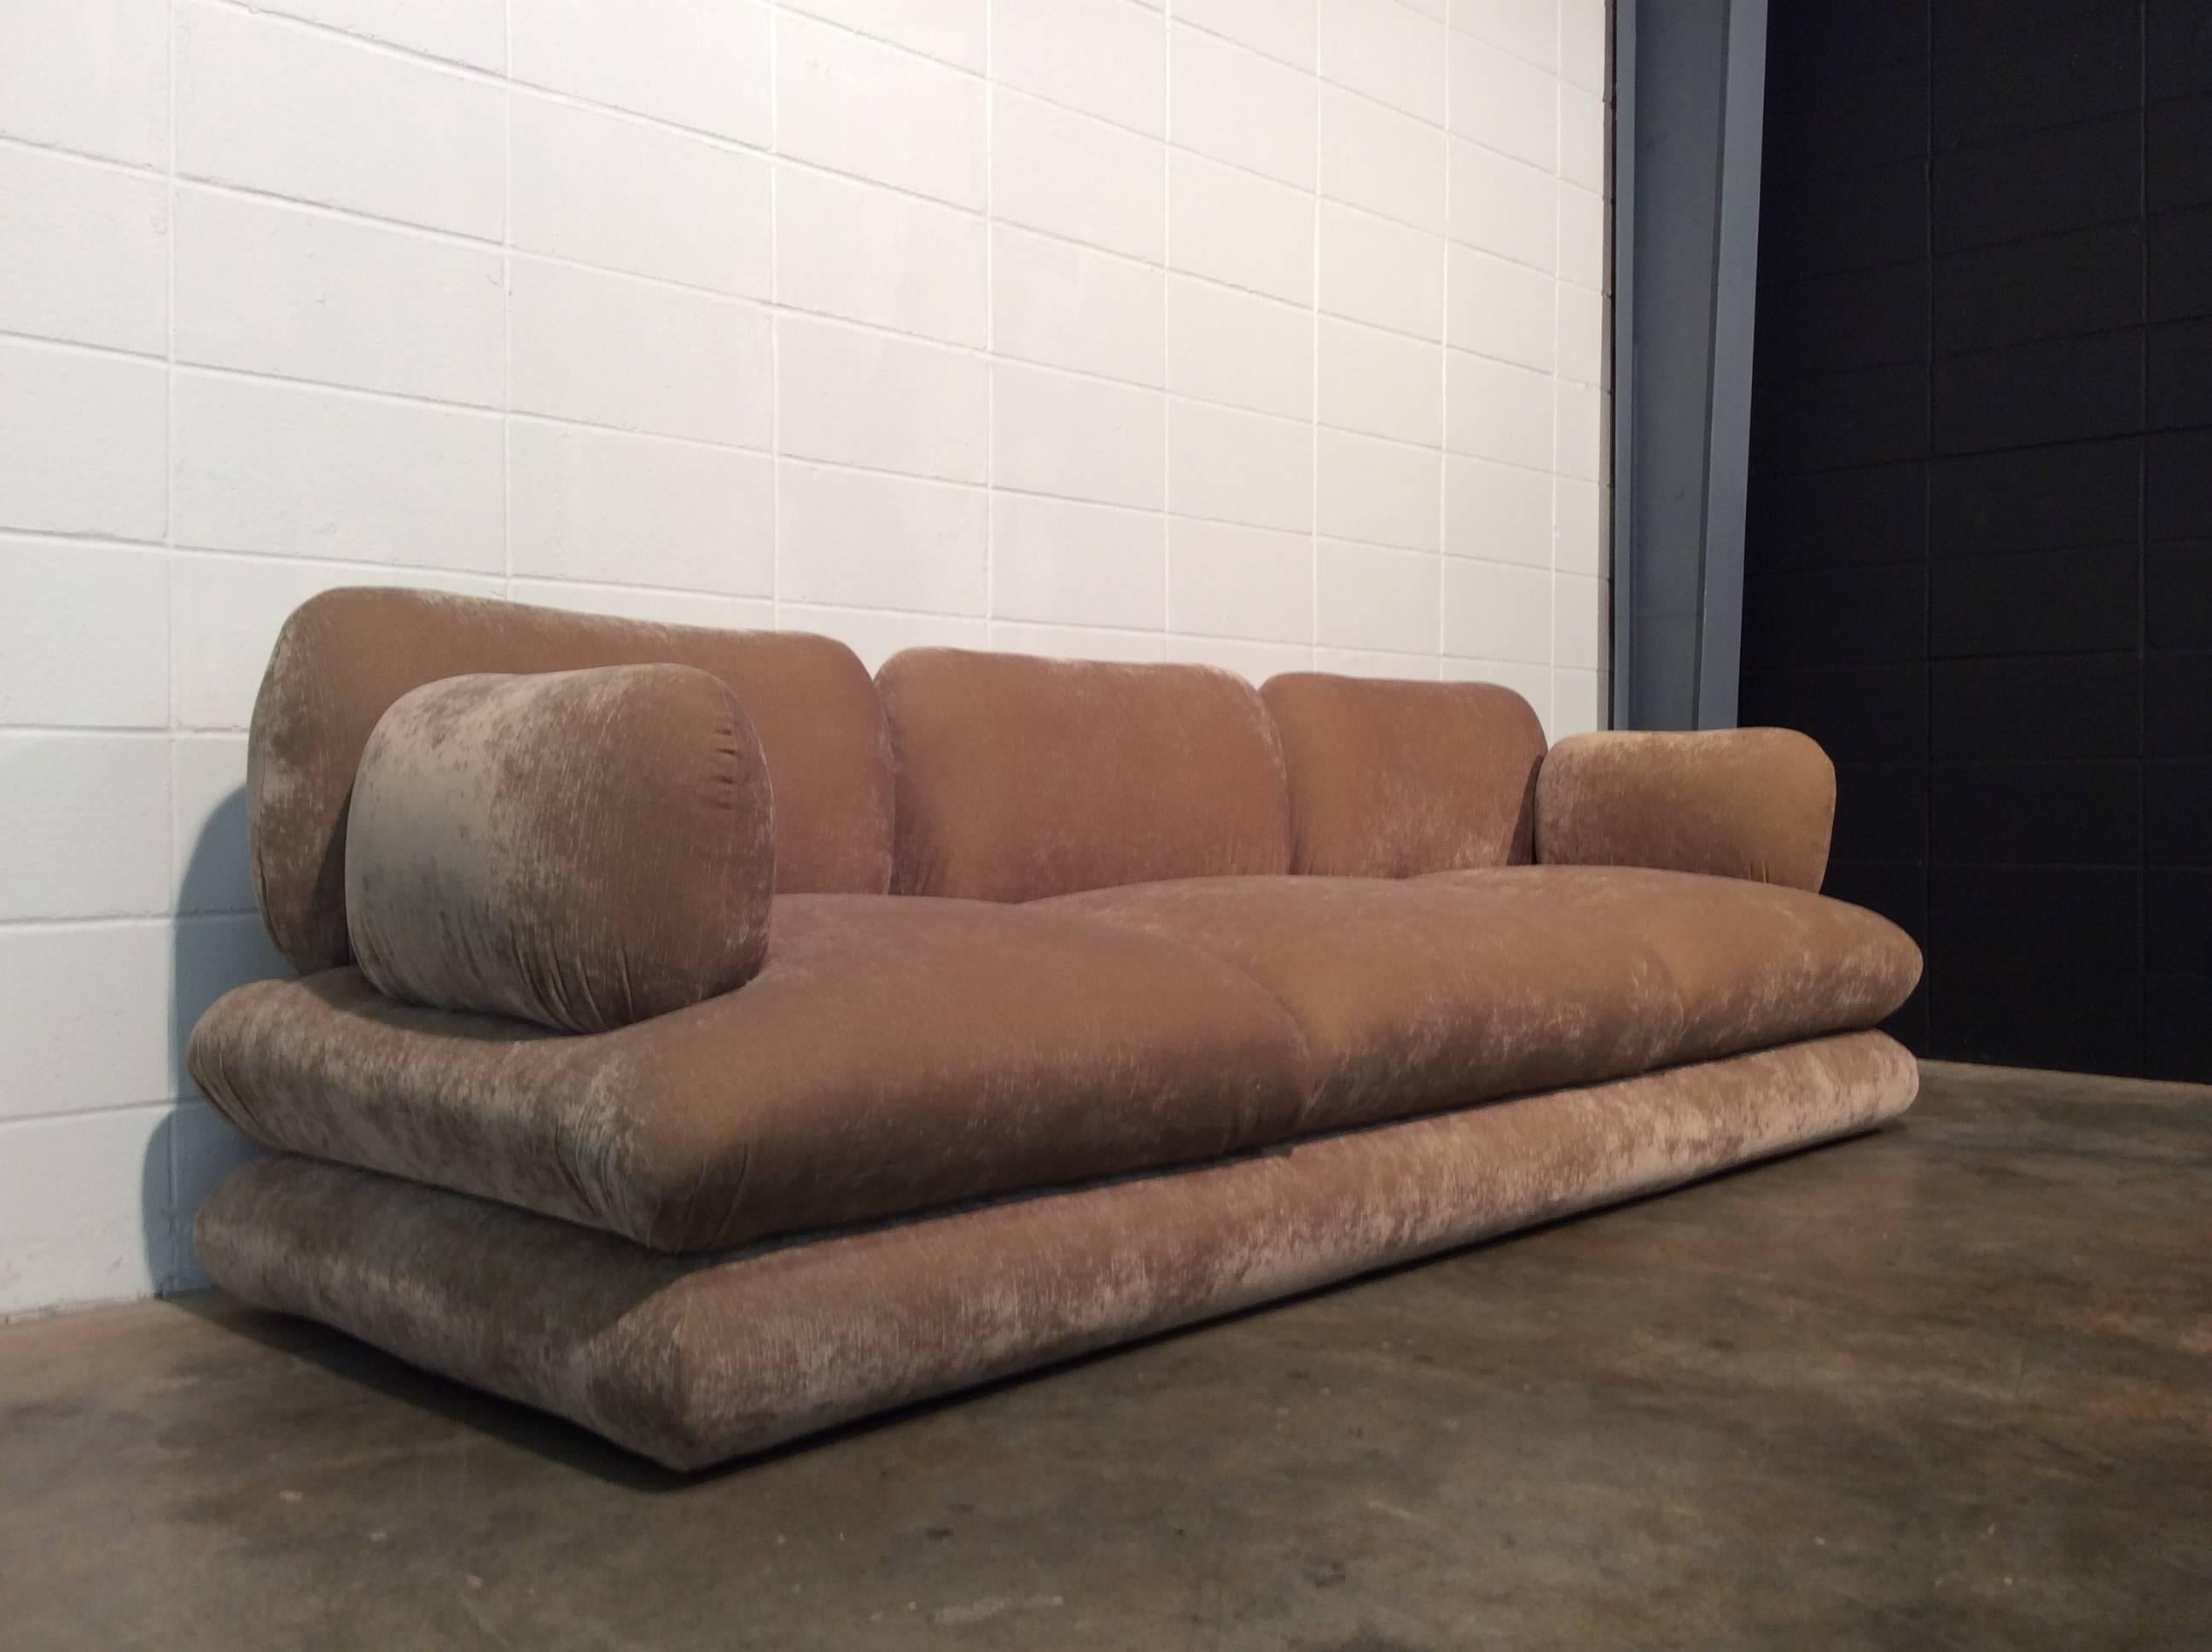 Mario Bellini style Mid Century Modern sofa tagged imported by Weiman. The sofa has been newly upholstered in a Cognac colored velour. It is very soft to the touch and comfortable. 
No known issues. Ready for use.